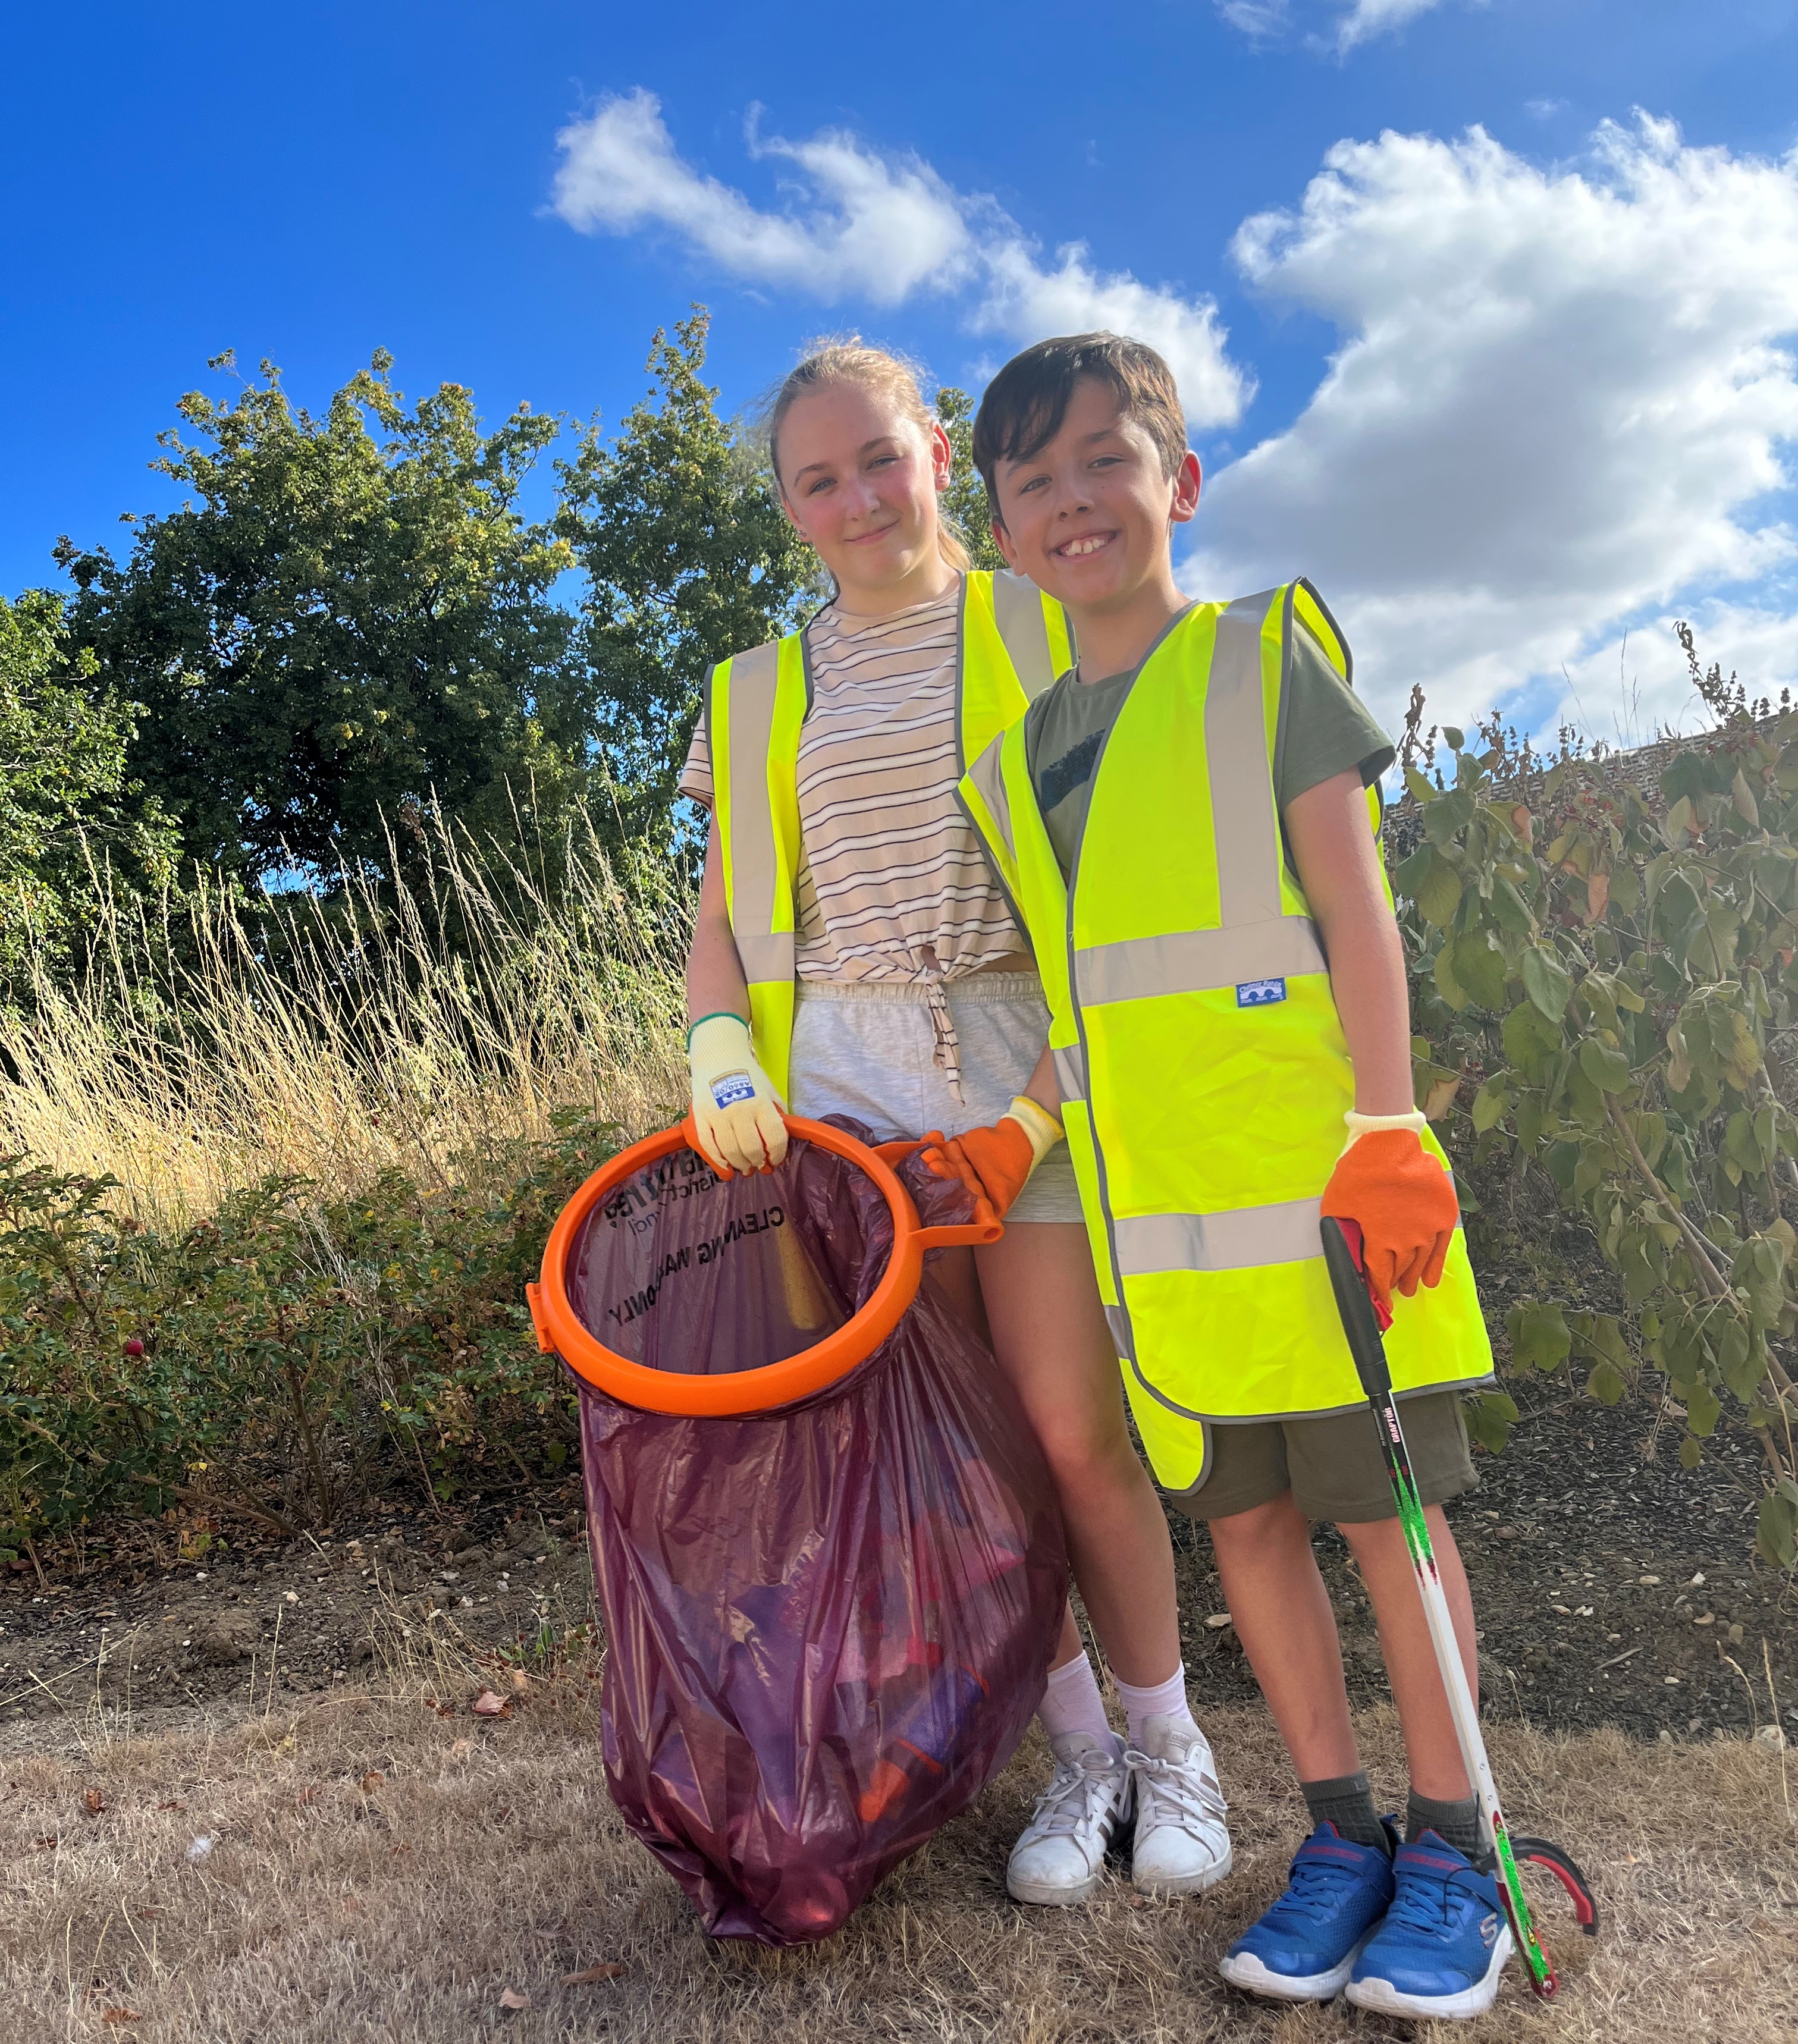 Grace and Jamie litter picking the Rivenhall Park estate in Witham